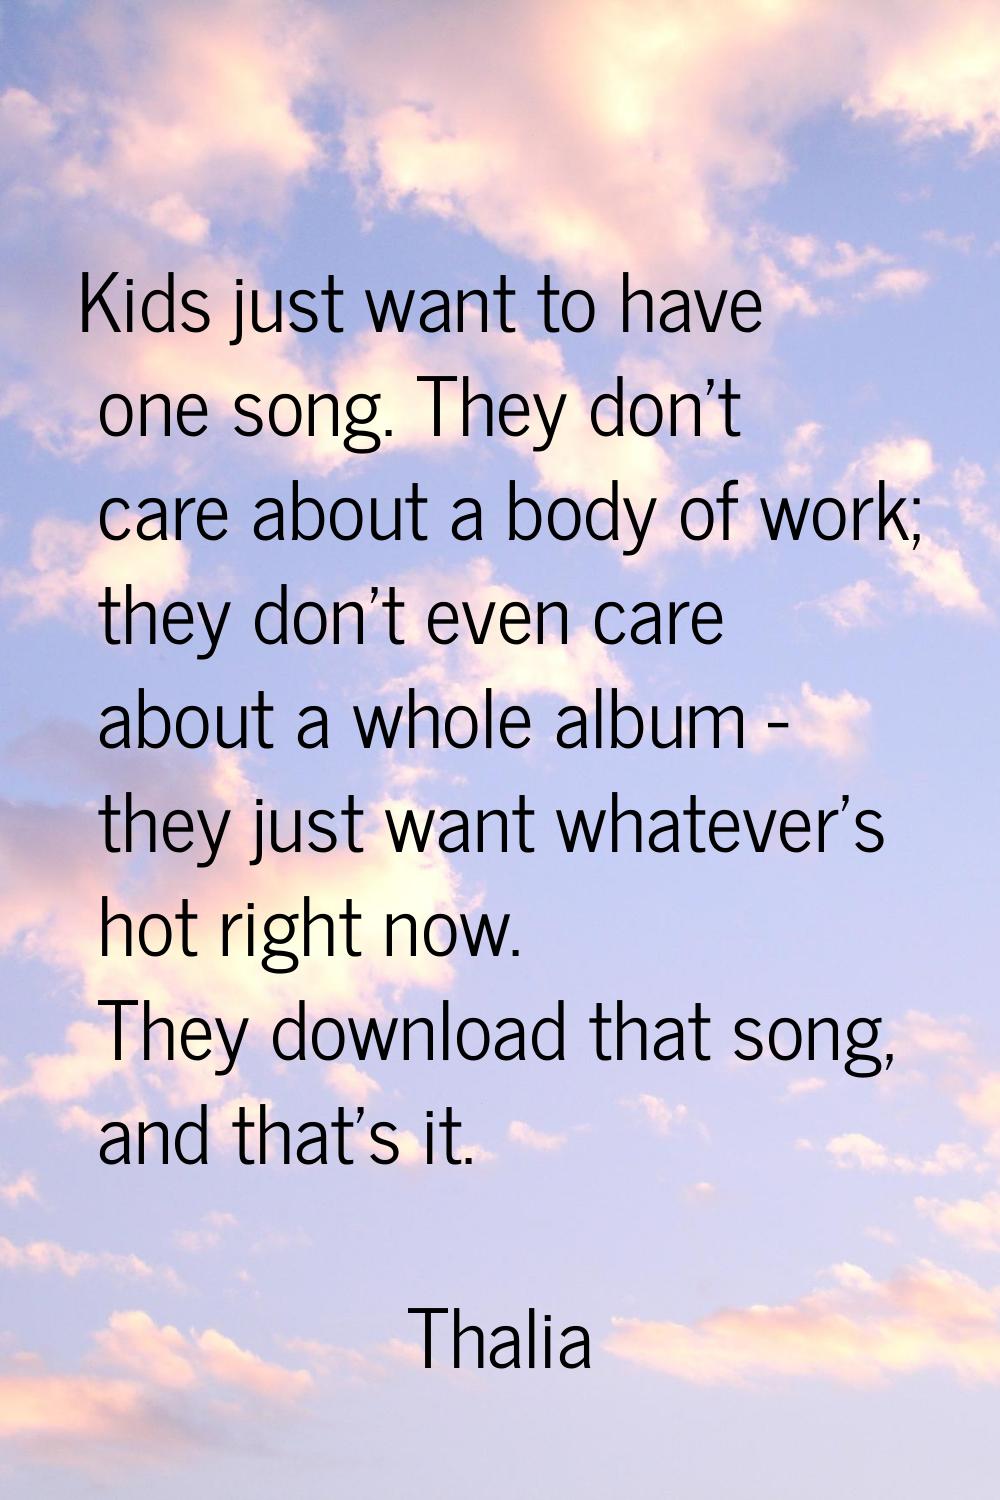 Kids just want to have one song. They don't care about a body of work; they don't even care about a